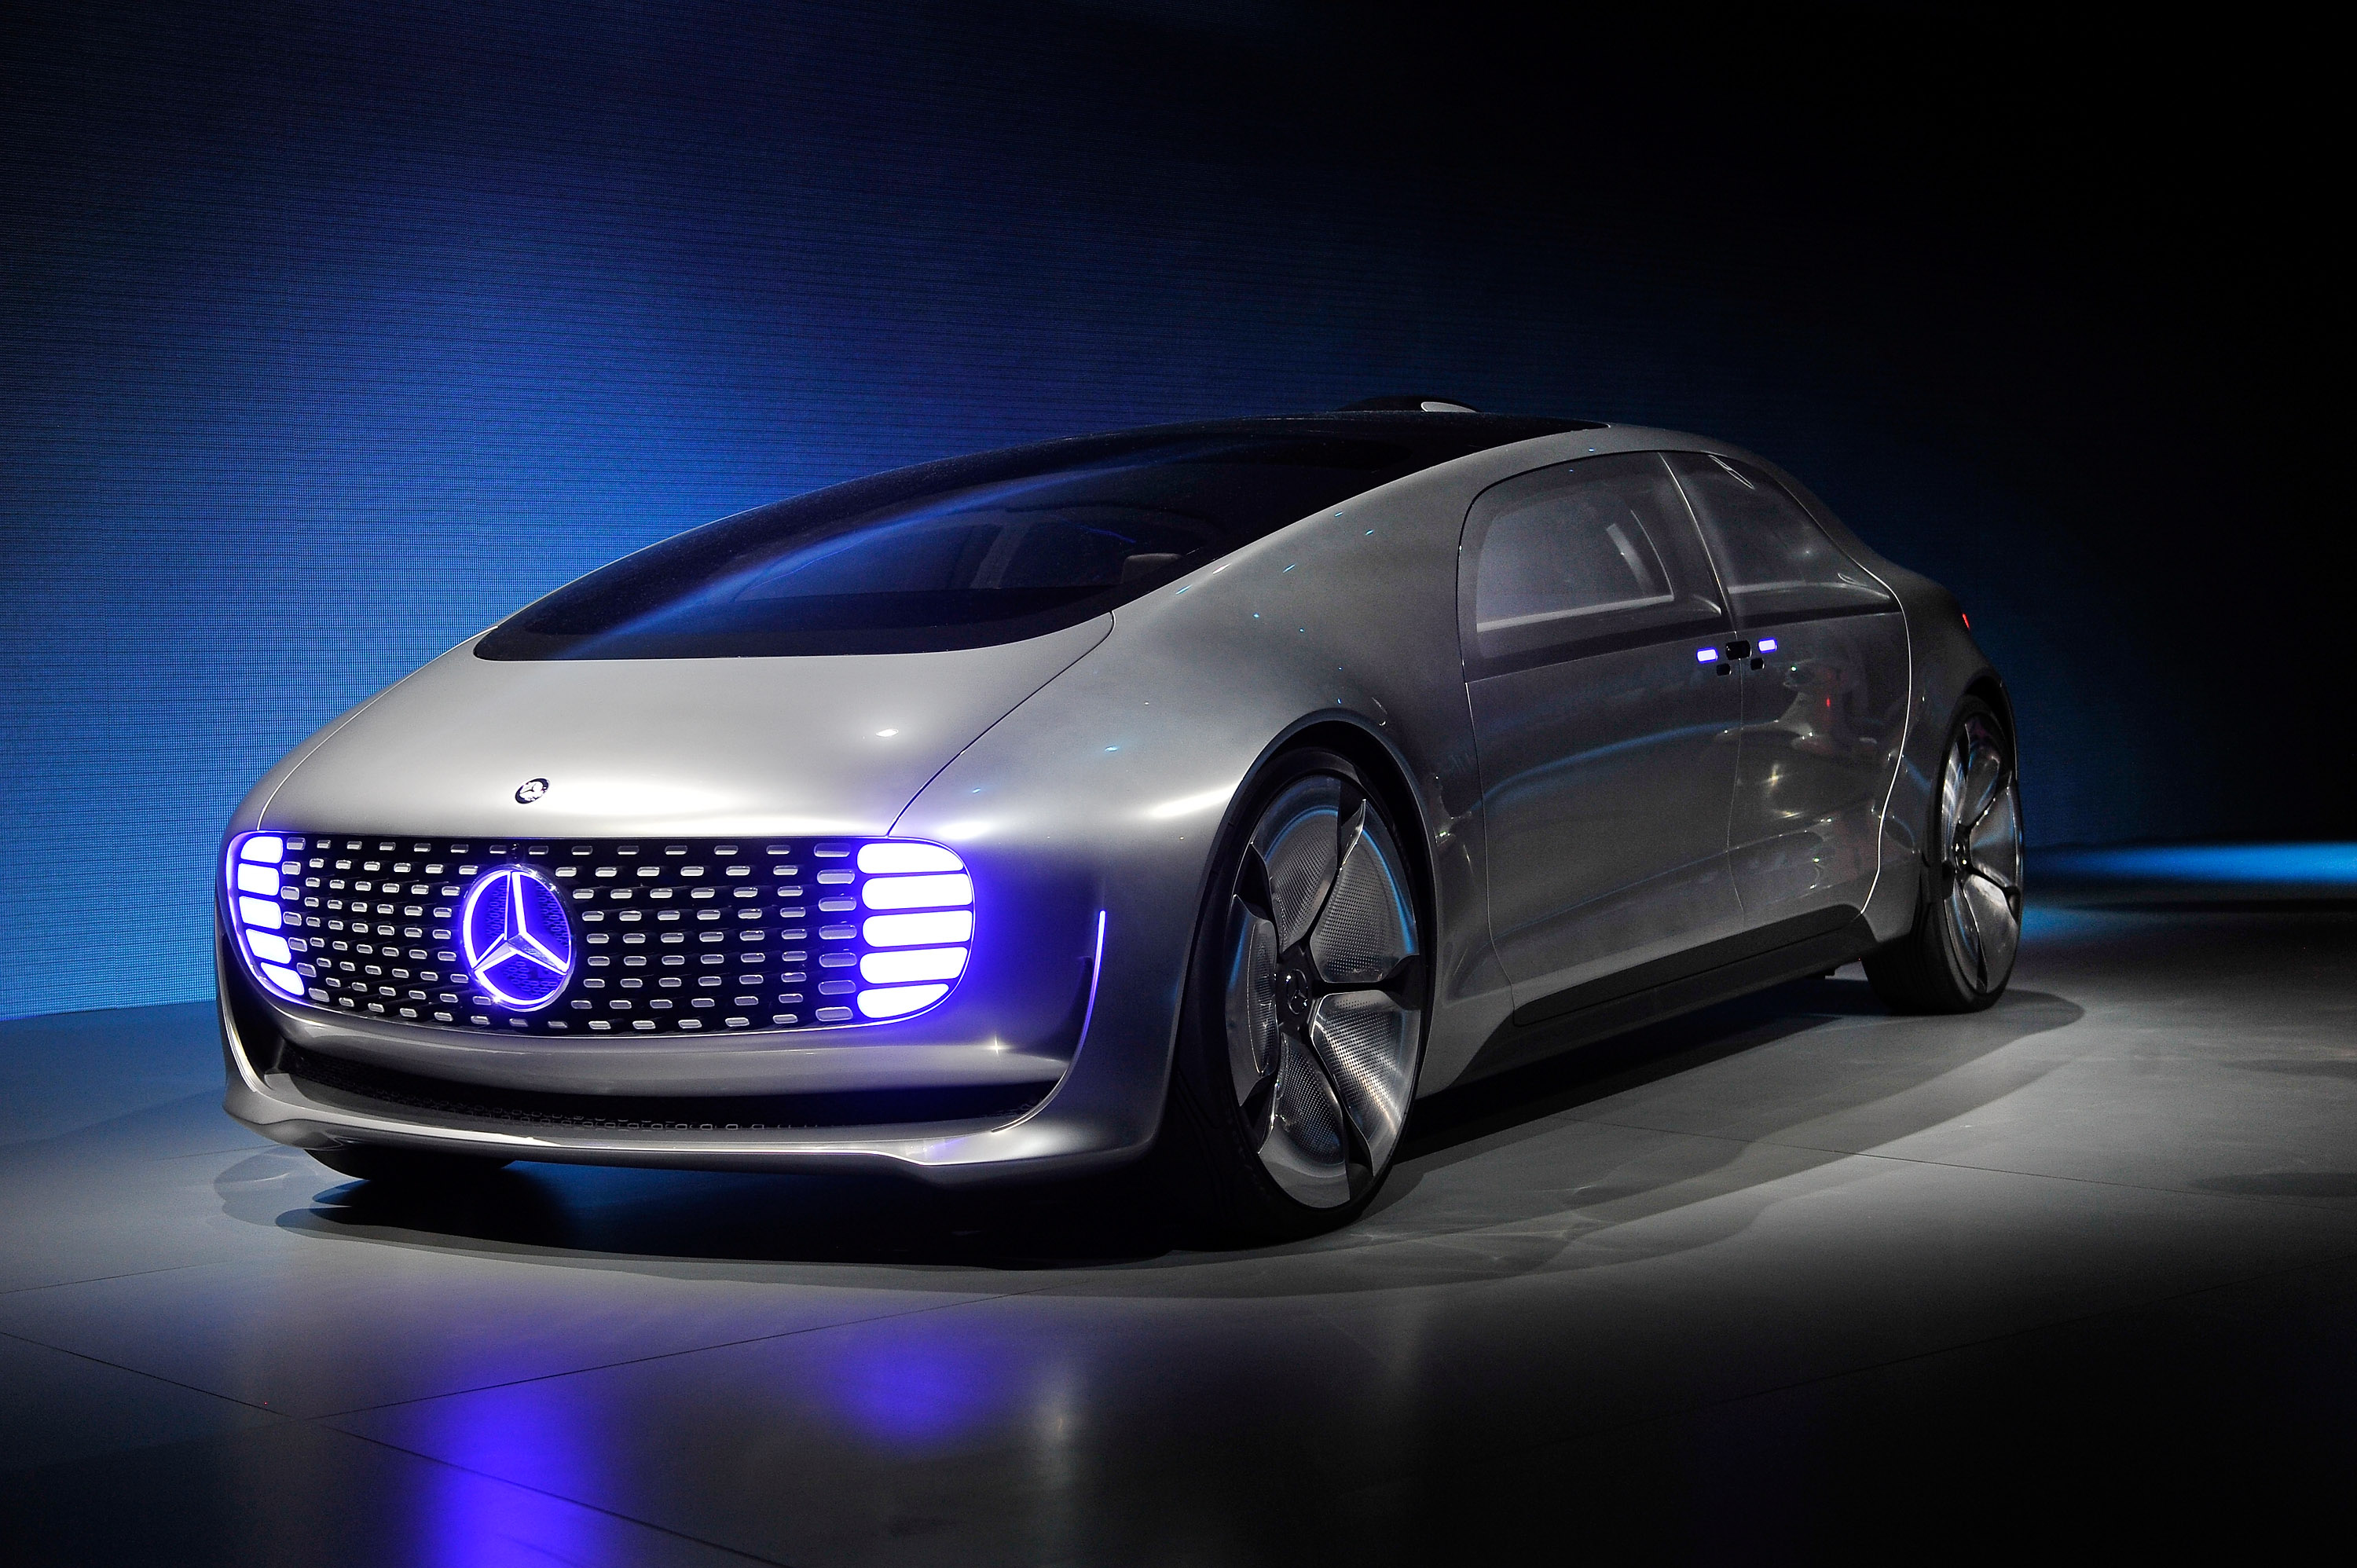 A Mercedes-Benz  F 015 autonomous driving automobile is displayed at the Mercedes-Benz press event at The Chelsea at The Cosmopolitan of Las Vegas for the 2015 International CES on January 5, 2015 in Las Vegas, Nevada. (David Becker—Getty Images)